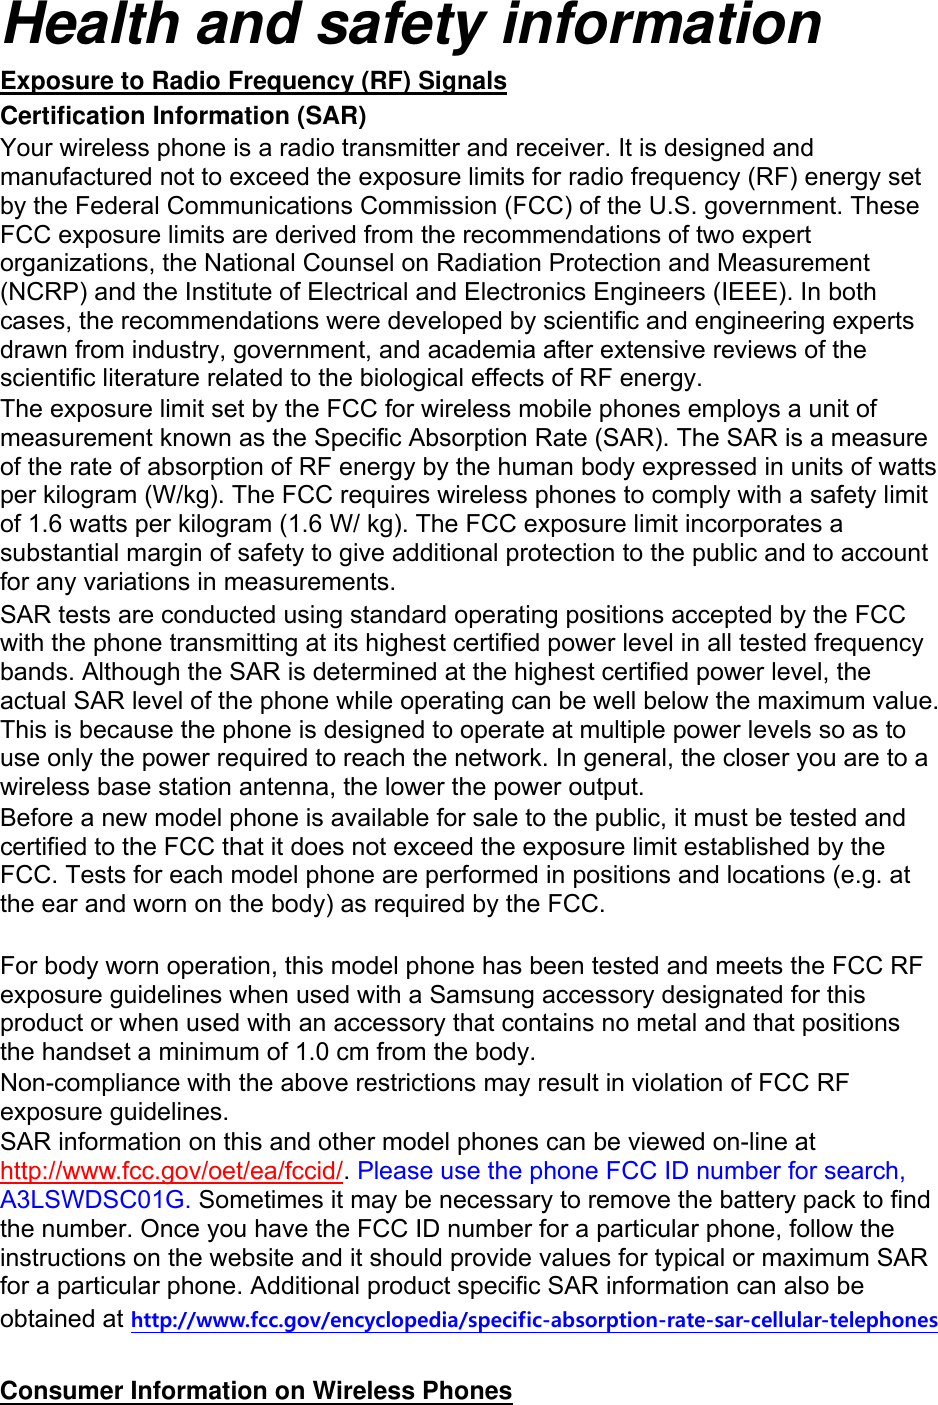 Health and safety information Exposure to Radio Frequency (RF) Signals Certification Information (SAR) Your wireless phone is a radio transmitter and receiver. It is designed and manufactured not to exceed the exposure limits for radio frequency (RF) energy set by the Federal Communications Commission (FCC) of the U.S. government. These FCC exposure limits are derived from the recommendations of two expert organizations, the National Counsel on Radiation Protection and Measurement (NCRP) and the Institute of Electrical and Electronics Engineers (IEEE). In both cases, the recommendations were developed by scientific and engineering experts drawn from industry, government, and academia after extensive reviews of the scientific literature related to the biological effects of RF energy. The exposure limit set by the FCC for wireless mobile phones employs a unit of measurement known as the Specific Absorption Rate (SAR). The SAR is a measure of the rate of absorption of RF energy by the human body expressed in units of watts per kilogram (W/kg). The FCC requires wireless phones to comply with a safety limit of 1.6 watts per kilogram (1.6 W/ kg). The FCC exposure limit incorporates a substantial margin of safety to give additional protection to the public and to account for any variations in measurements. SAR tests are conducted using standard operating positions accepted by the FCC with the phone transmitting at its highest certified power level in all tested frequency bands. Although the SAR is determined at the highest certified power level, the actual SAR level of the phone while operating can be well below the maximum value. This is because the phone is designed to operate at multiple power levels so as to use only the power required to reach the network. In general, the closer you are to a wireless base station antenna, the lower the power output. Before a new model phone is available for sale to the public, it must be tested and certified to the FCC that it does not exceed the exposure limit established by the FCC. Tests for each model phone are performed in positions and locations (e.g. at the ear and worn on the body) as required by the FCC.      For body worn operation, this model phone has been tested and meets the FCC RF exposure guidelines when used with a Samsung accessory designated for this product or when used with an accessory that contains no metal and that positions the handset a minimum of 1.0 cm from the body.   Non-compliance with the above restrictions may result in violation of FCC RF exposure guidelines. SAR information on this and other model phones can be viewed on-line at http://www.fcc.gov/oet/ea/fccid/. Please use the phone FCC ID number for search, A3LSWDSC01G. Sometimes it may be necessary to remove the battery pack to find the number. Once you have the FCC ID number for a particular phone, follow the instructions on the website and it should provide values for typical or maximum SAR for a particular phone. Additional product specific SAR information can also be obtained at http://www.fcc.gov/encyclopedia/specific-absorption-rate-sar-cellular-telephones  Consumer Information on Wireless Phones 